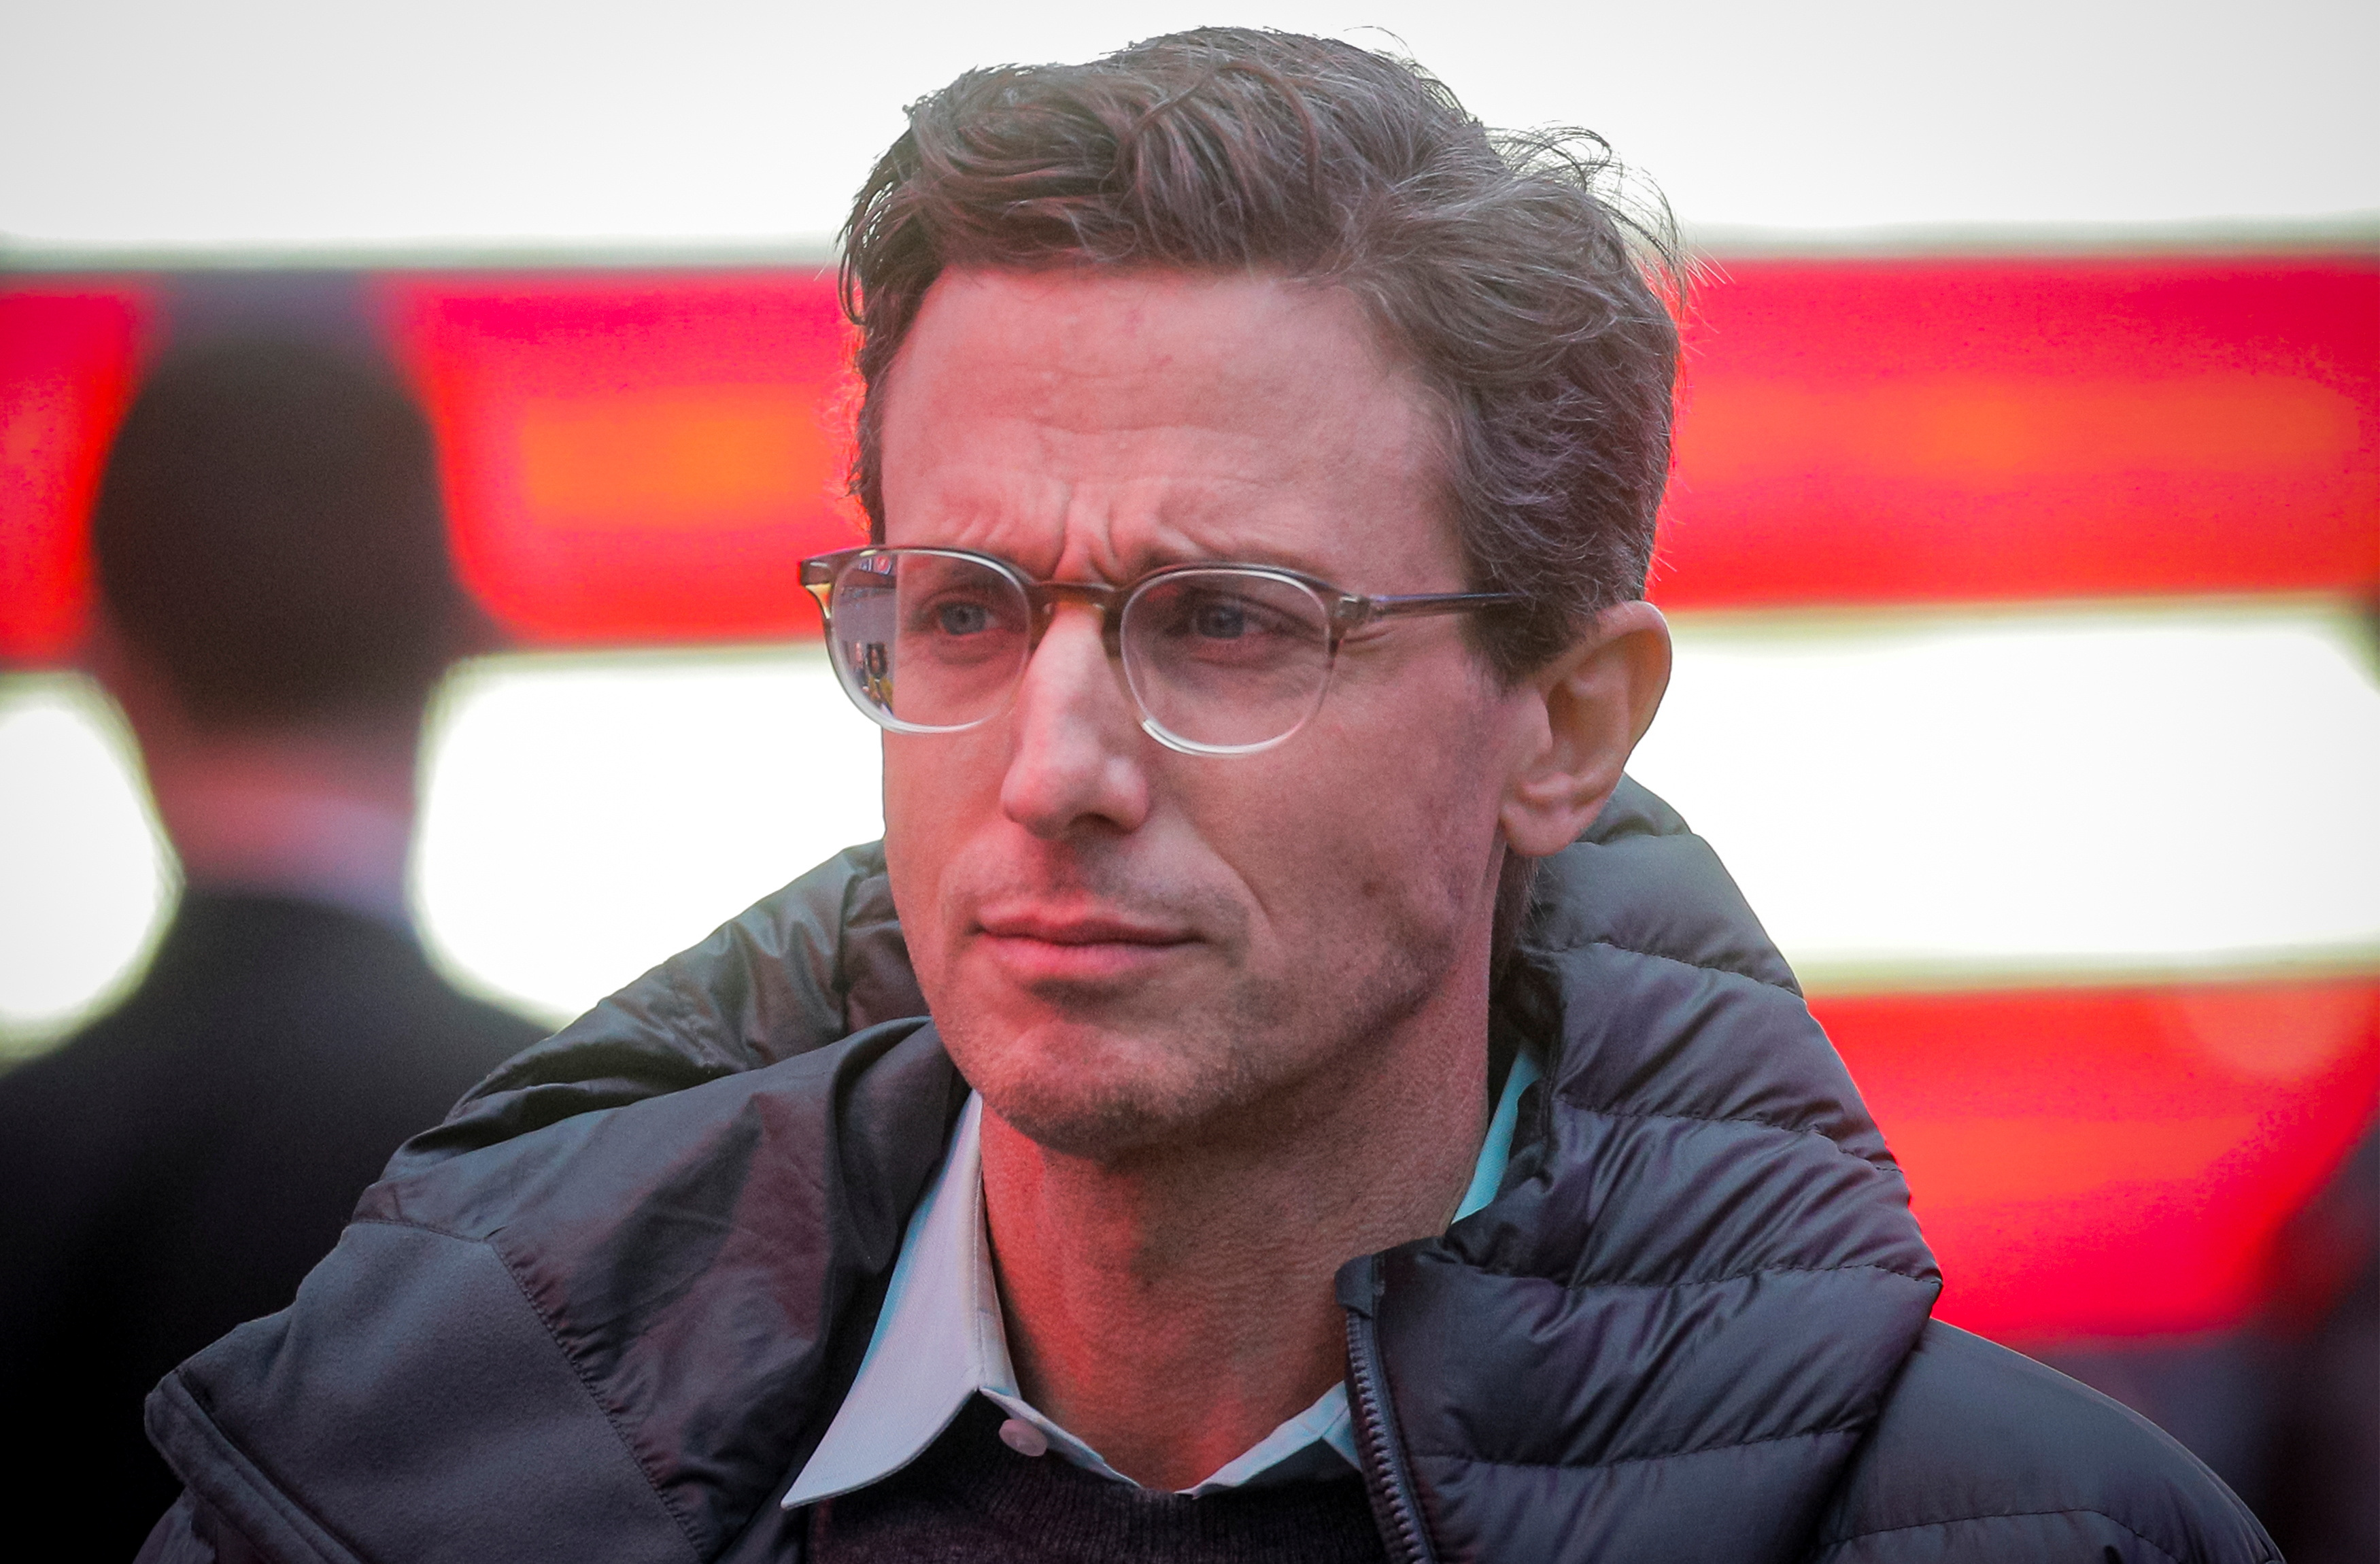 Jonah Peretti, founder and CEO of BuzzFeed, attends his company's debut outside the Nasdaq Market in Times Square in New York